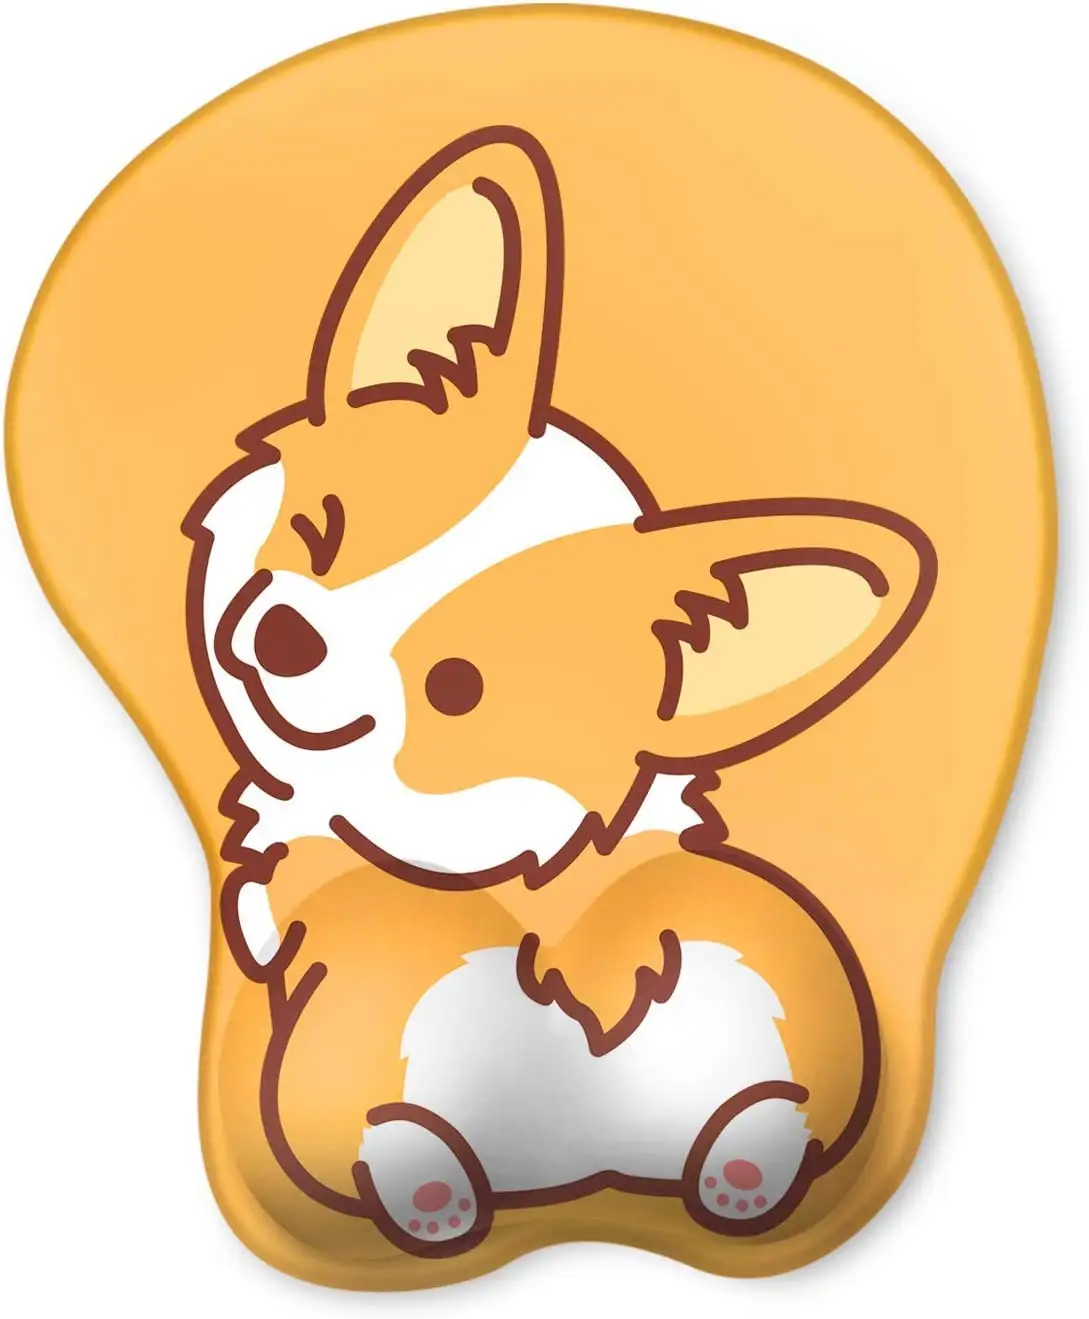 Mouse Pad with Wrist Support ,Non-Slip Backing Corgi Anime Cute Gel Mouse Pad Wrist Rest, Easy-Typing mouse pad for Gaming